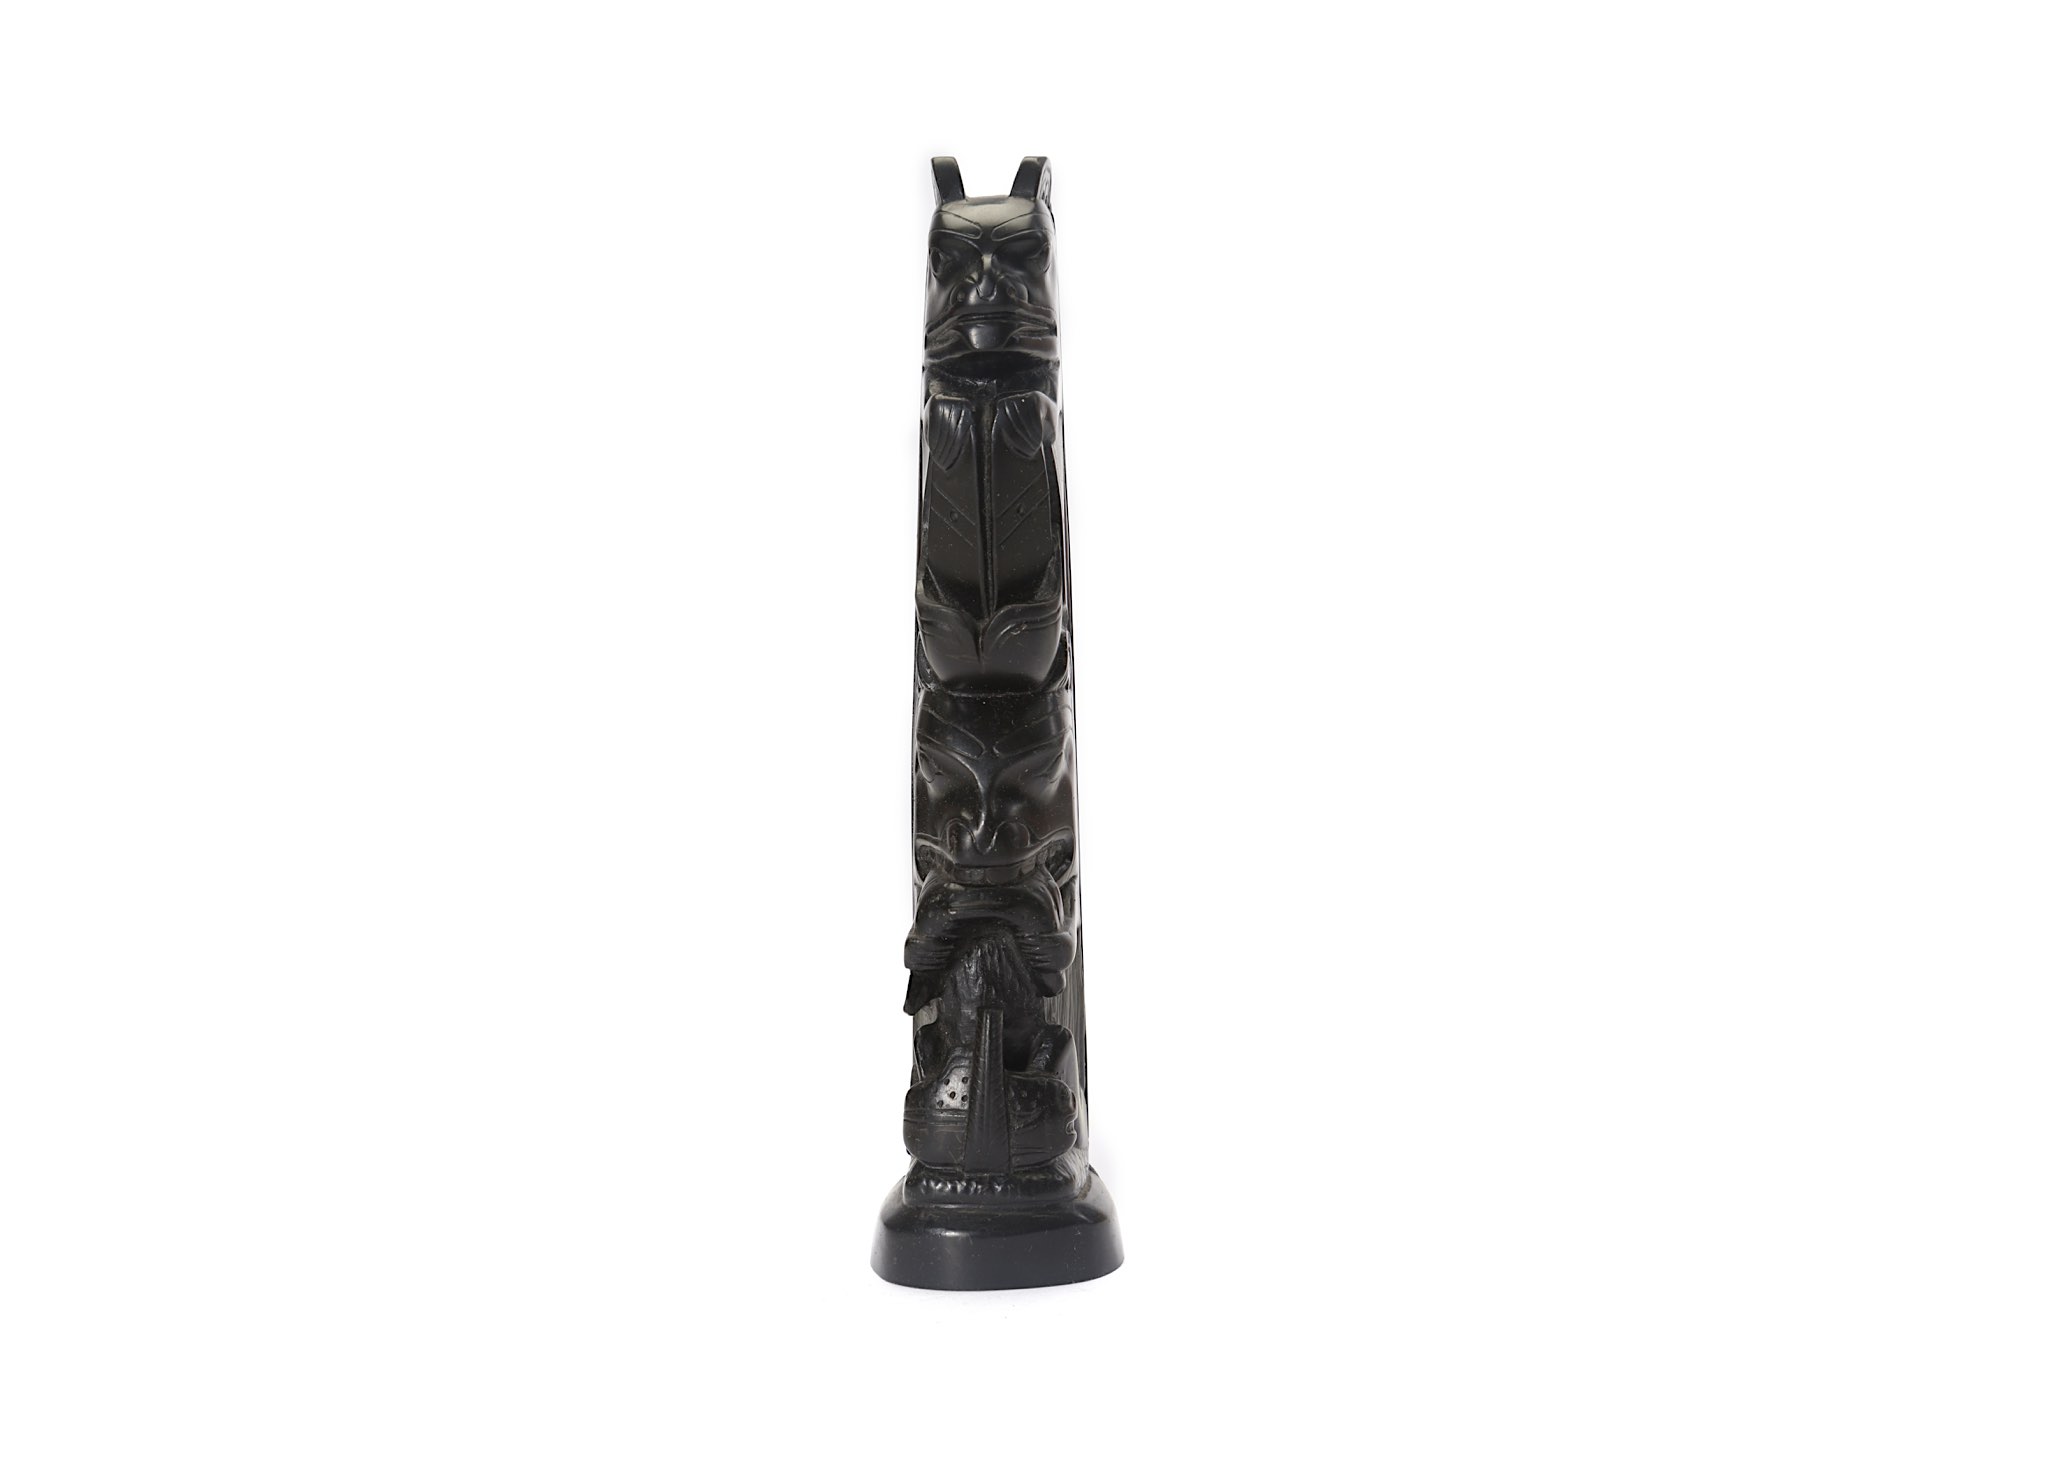 AN ARGILLITE TOTEM, HAIDA TRIBE In the form of two seated bears atop one another, 19.7cm high, - Image 2 of 5